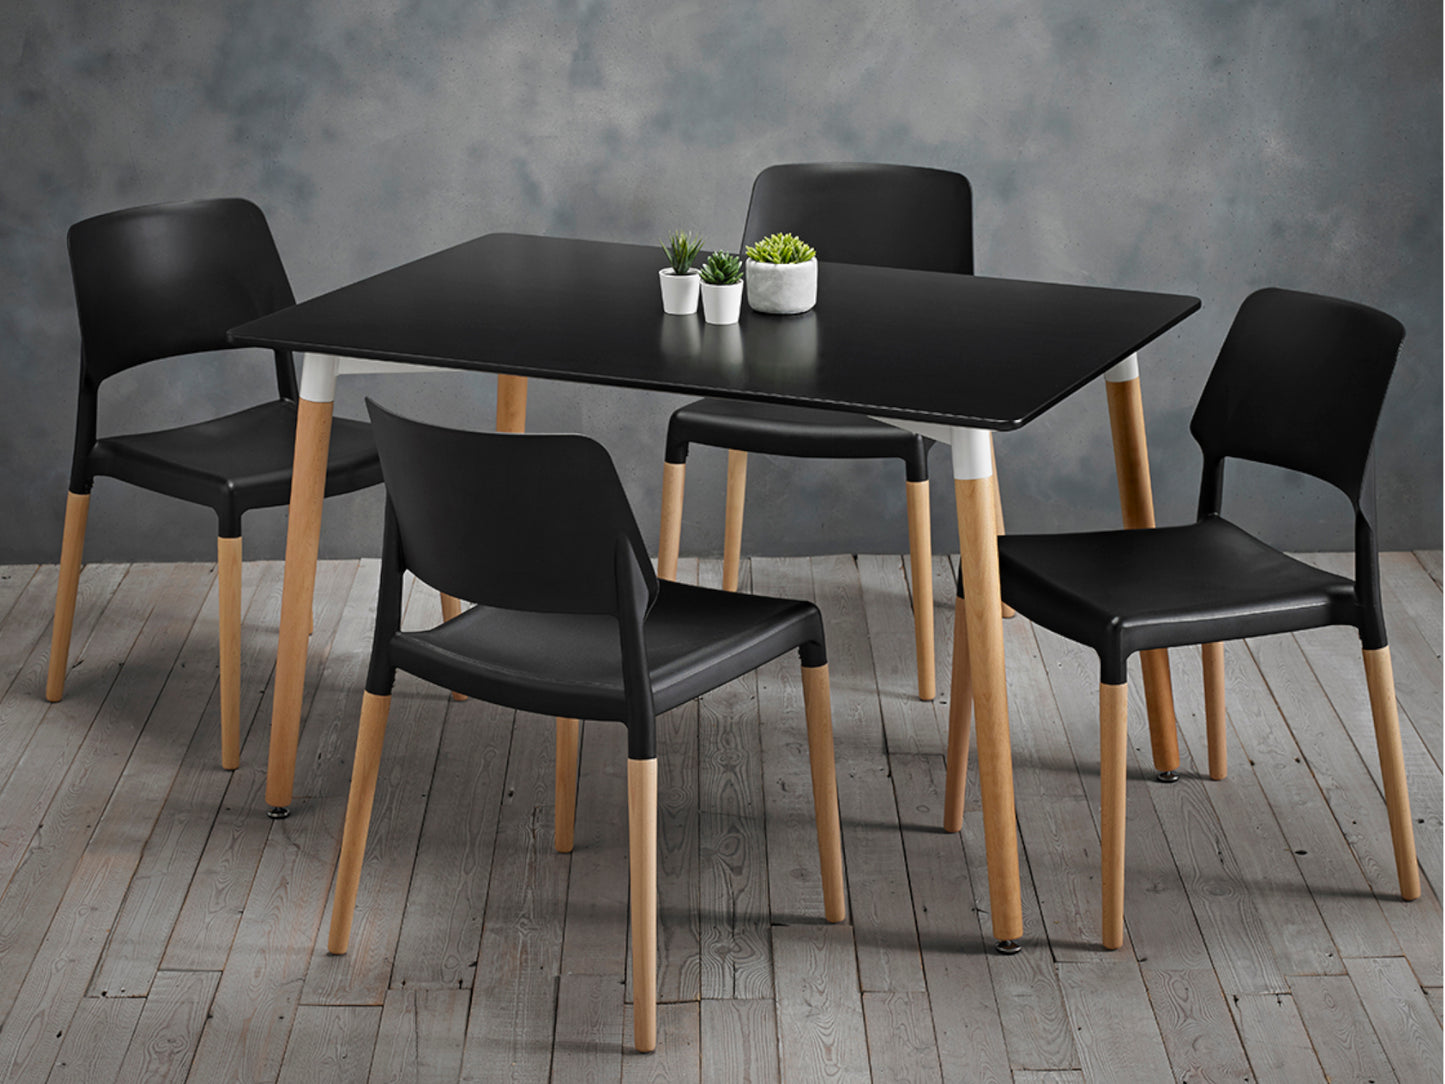 Riva Dining Chair in Black (2 Pack)